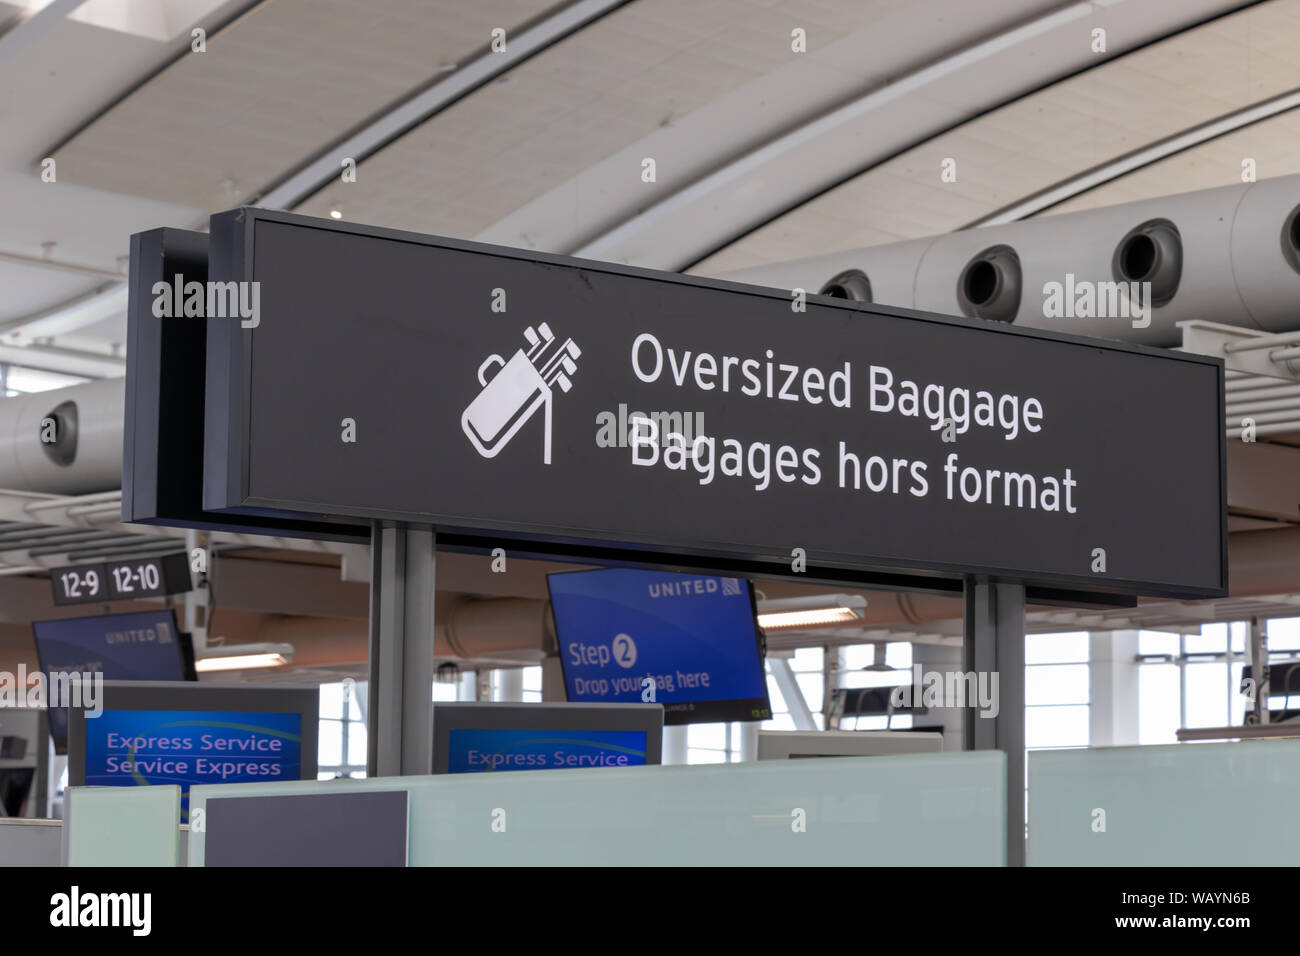 Oversized Baggage sign (English/French) in Terminal 1 at Toronto Pearson Int’l Airport. Stock Photo